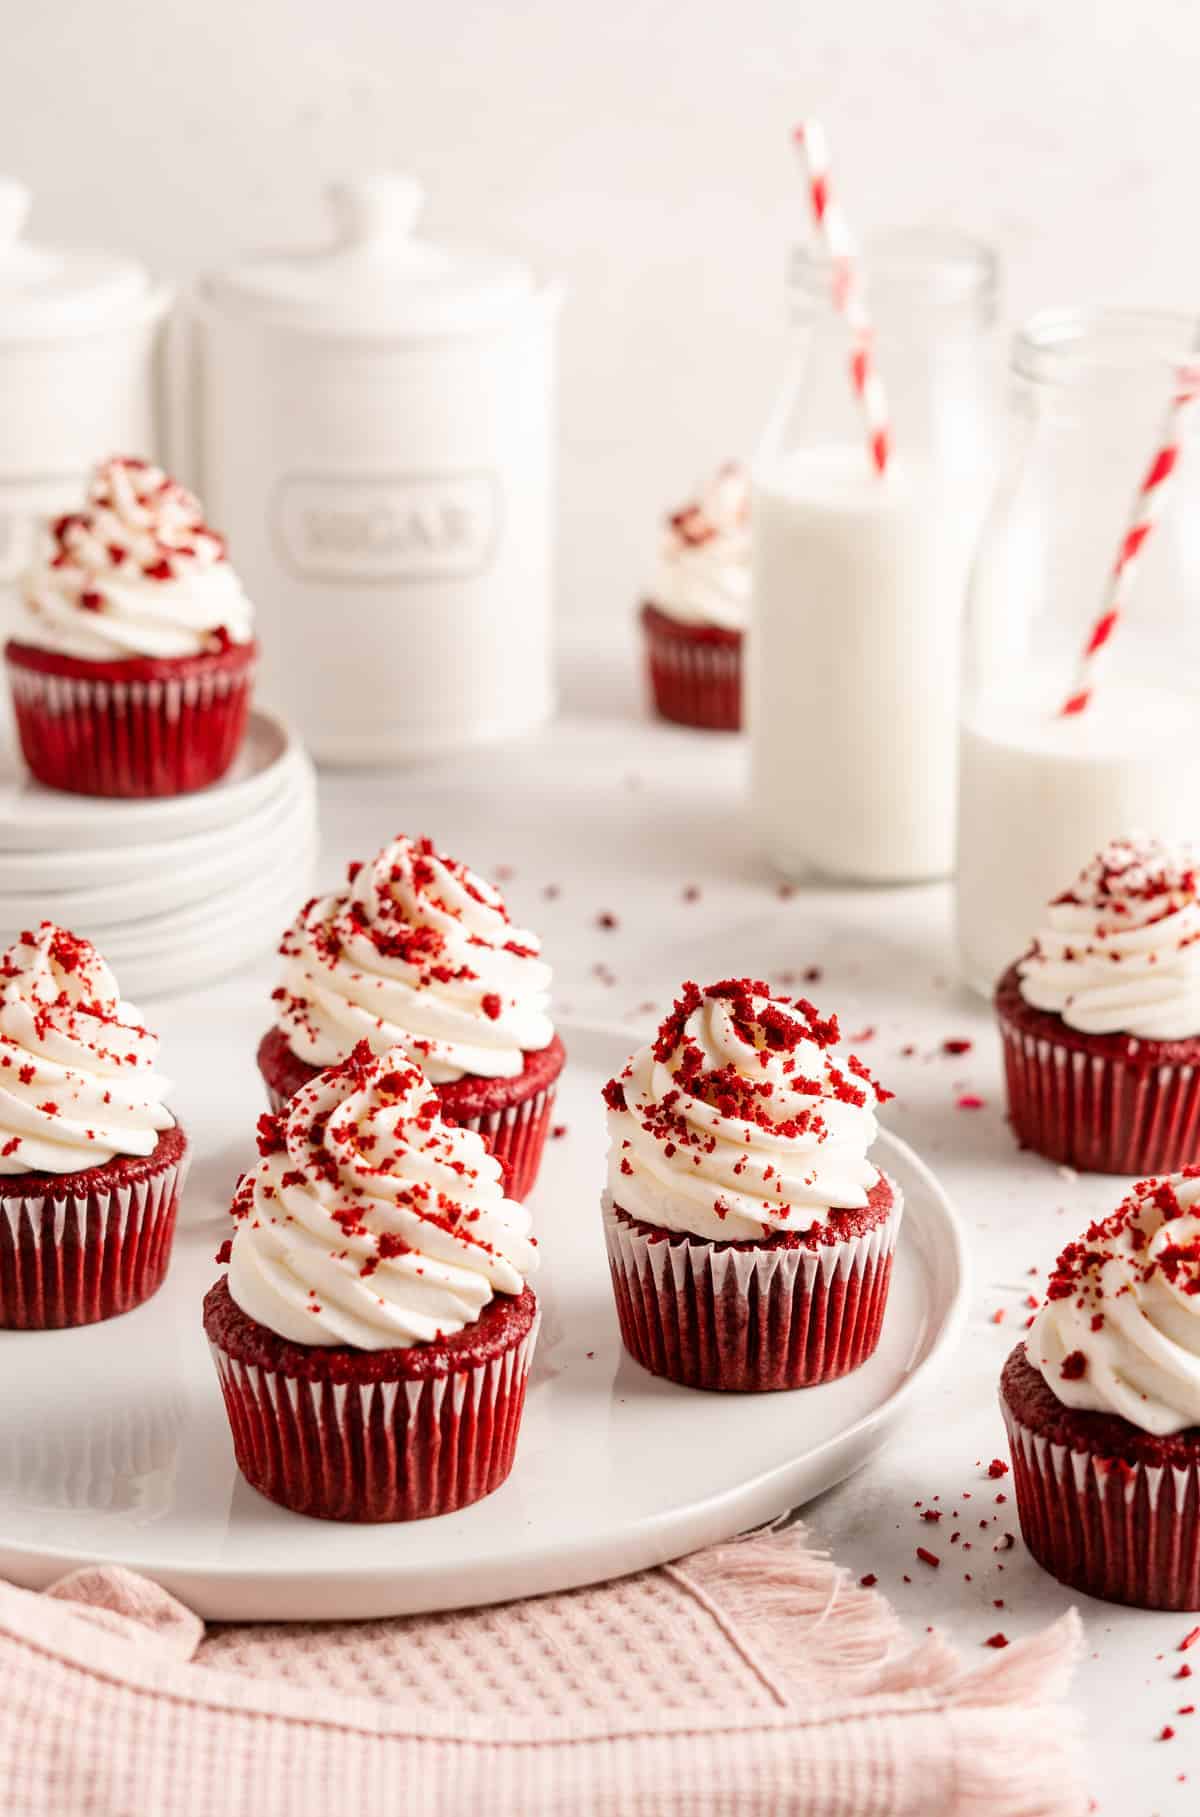 Vegan red velvet cupcakes decorated with cream cheese frosting and cake crumbs